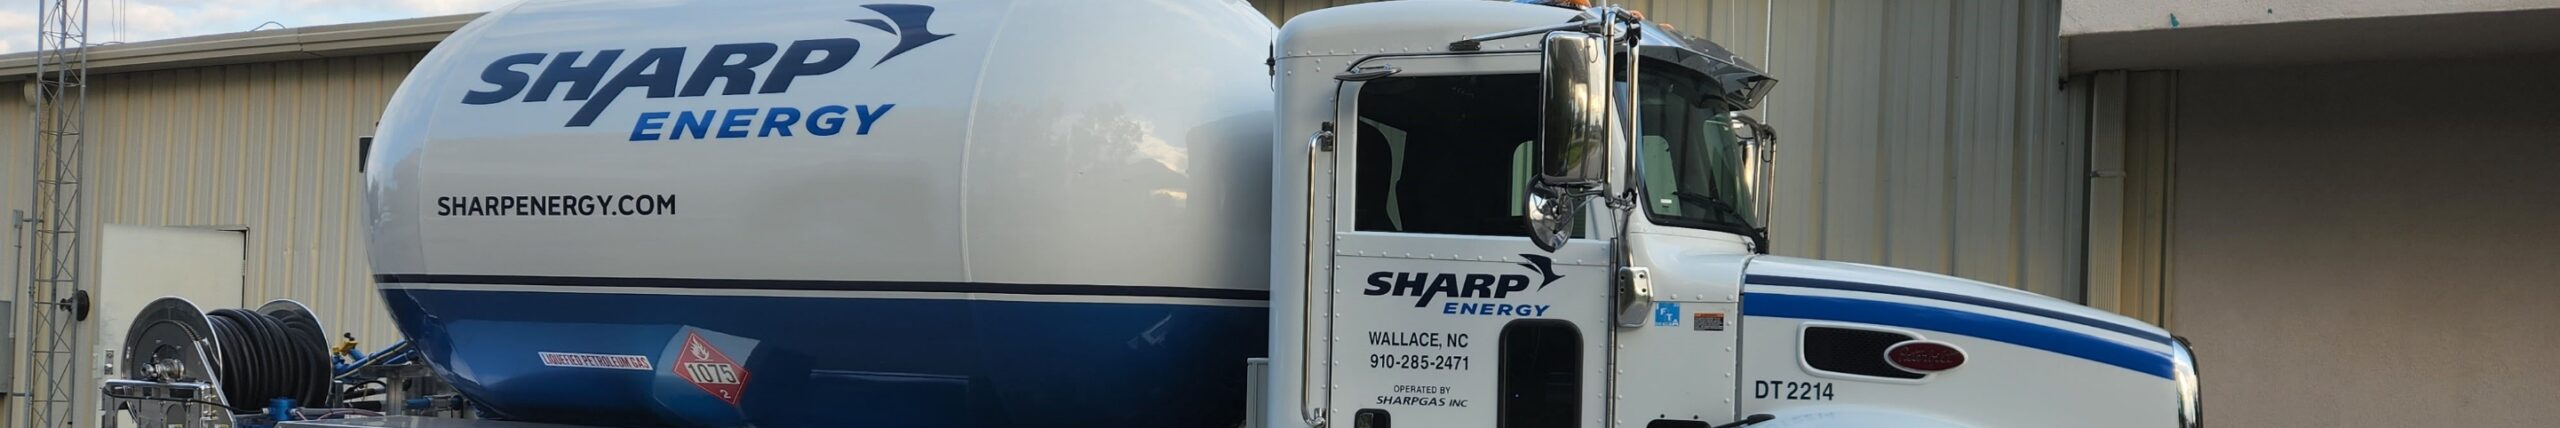 sharp energy delivery
wallace